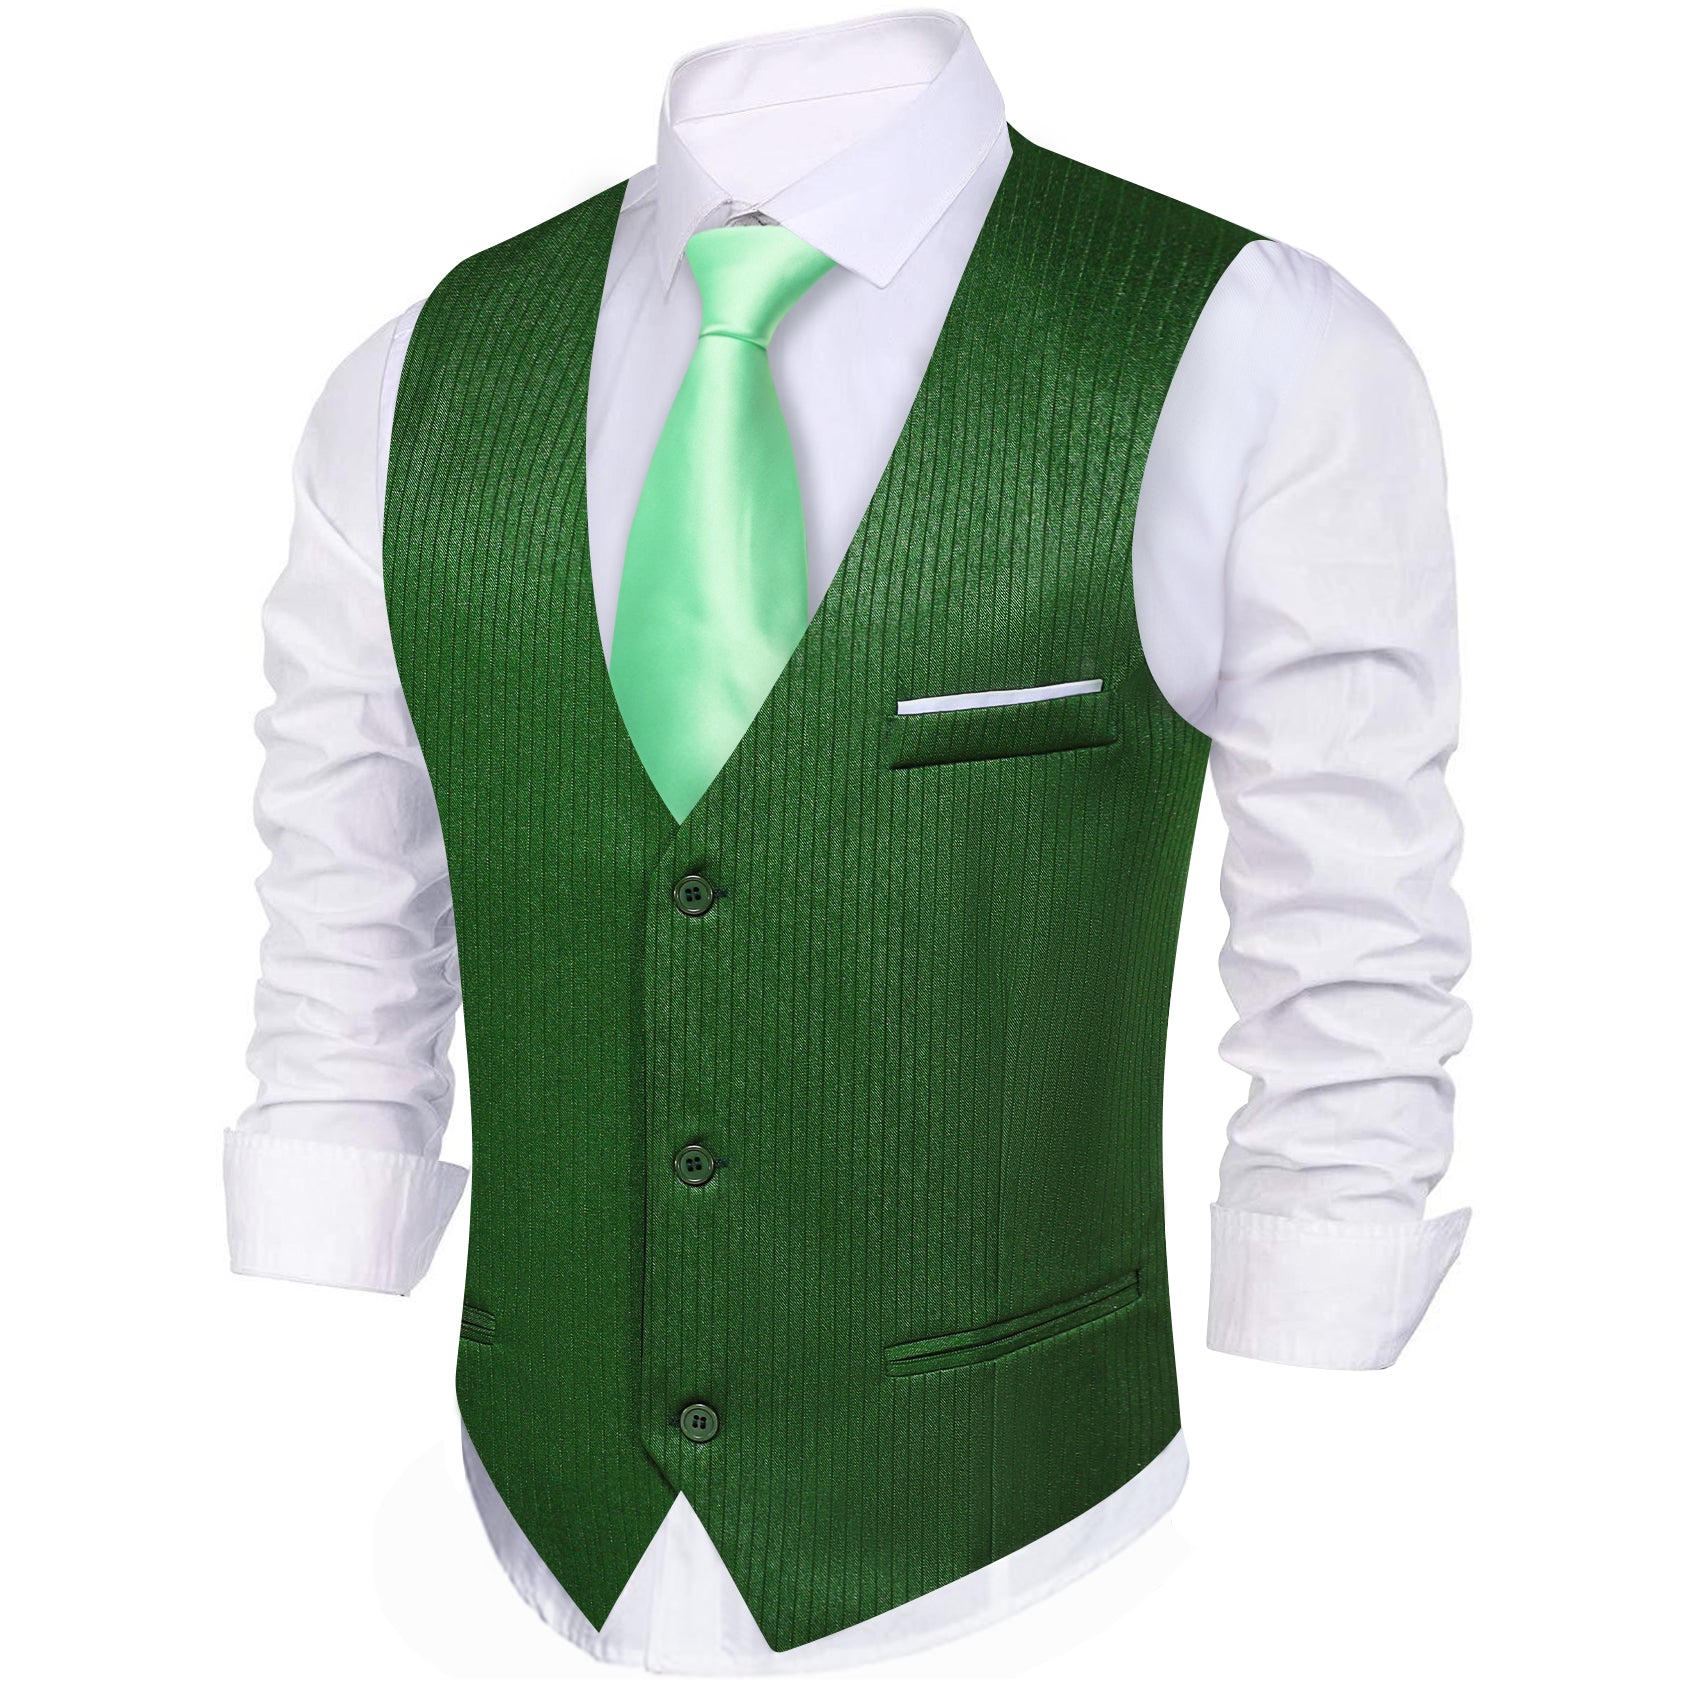 Barry.wang Grass Green Solid Business Vest Suit